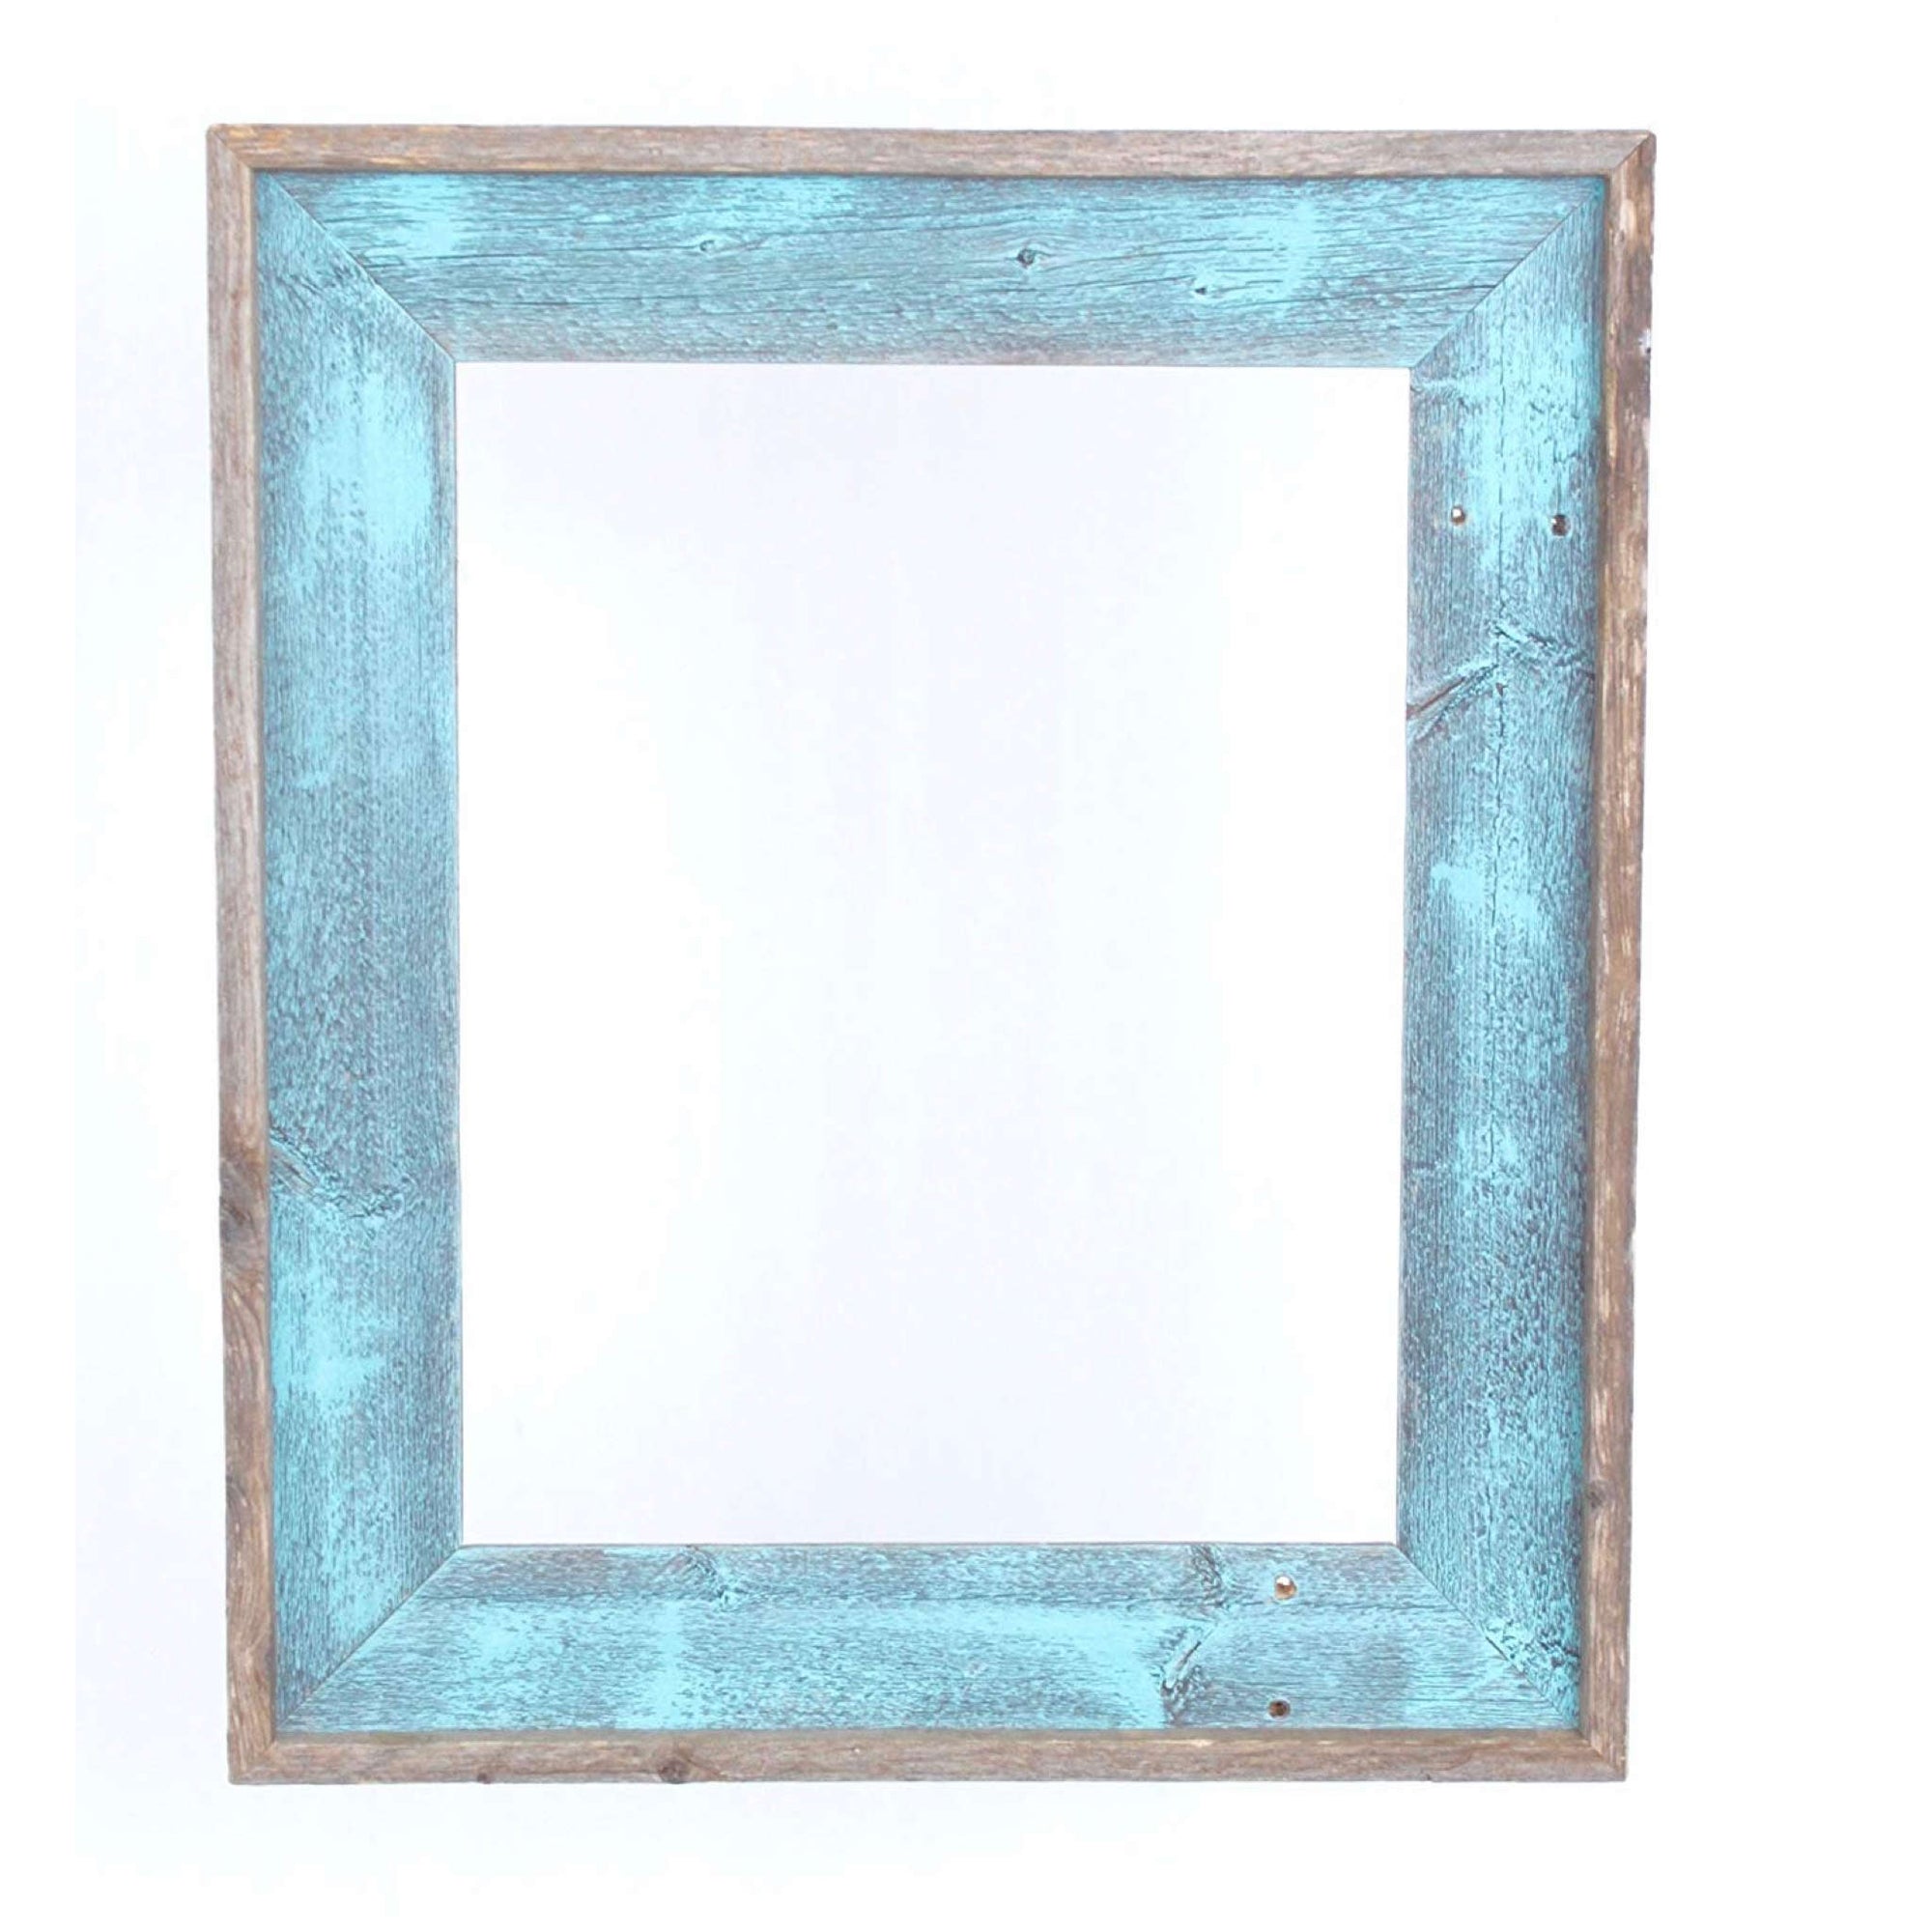 BarnwoodUSA Rustic Farmhouse Artisan 6 in. x 6 in. Robins Egg Blue Reclaimed Picture Frame